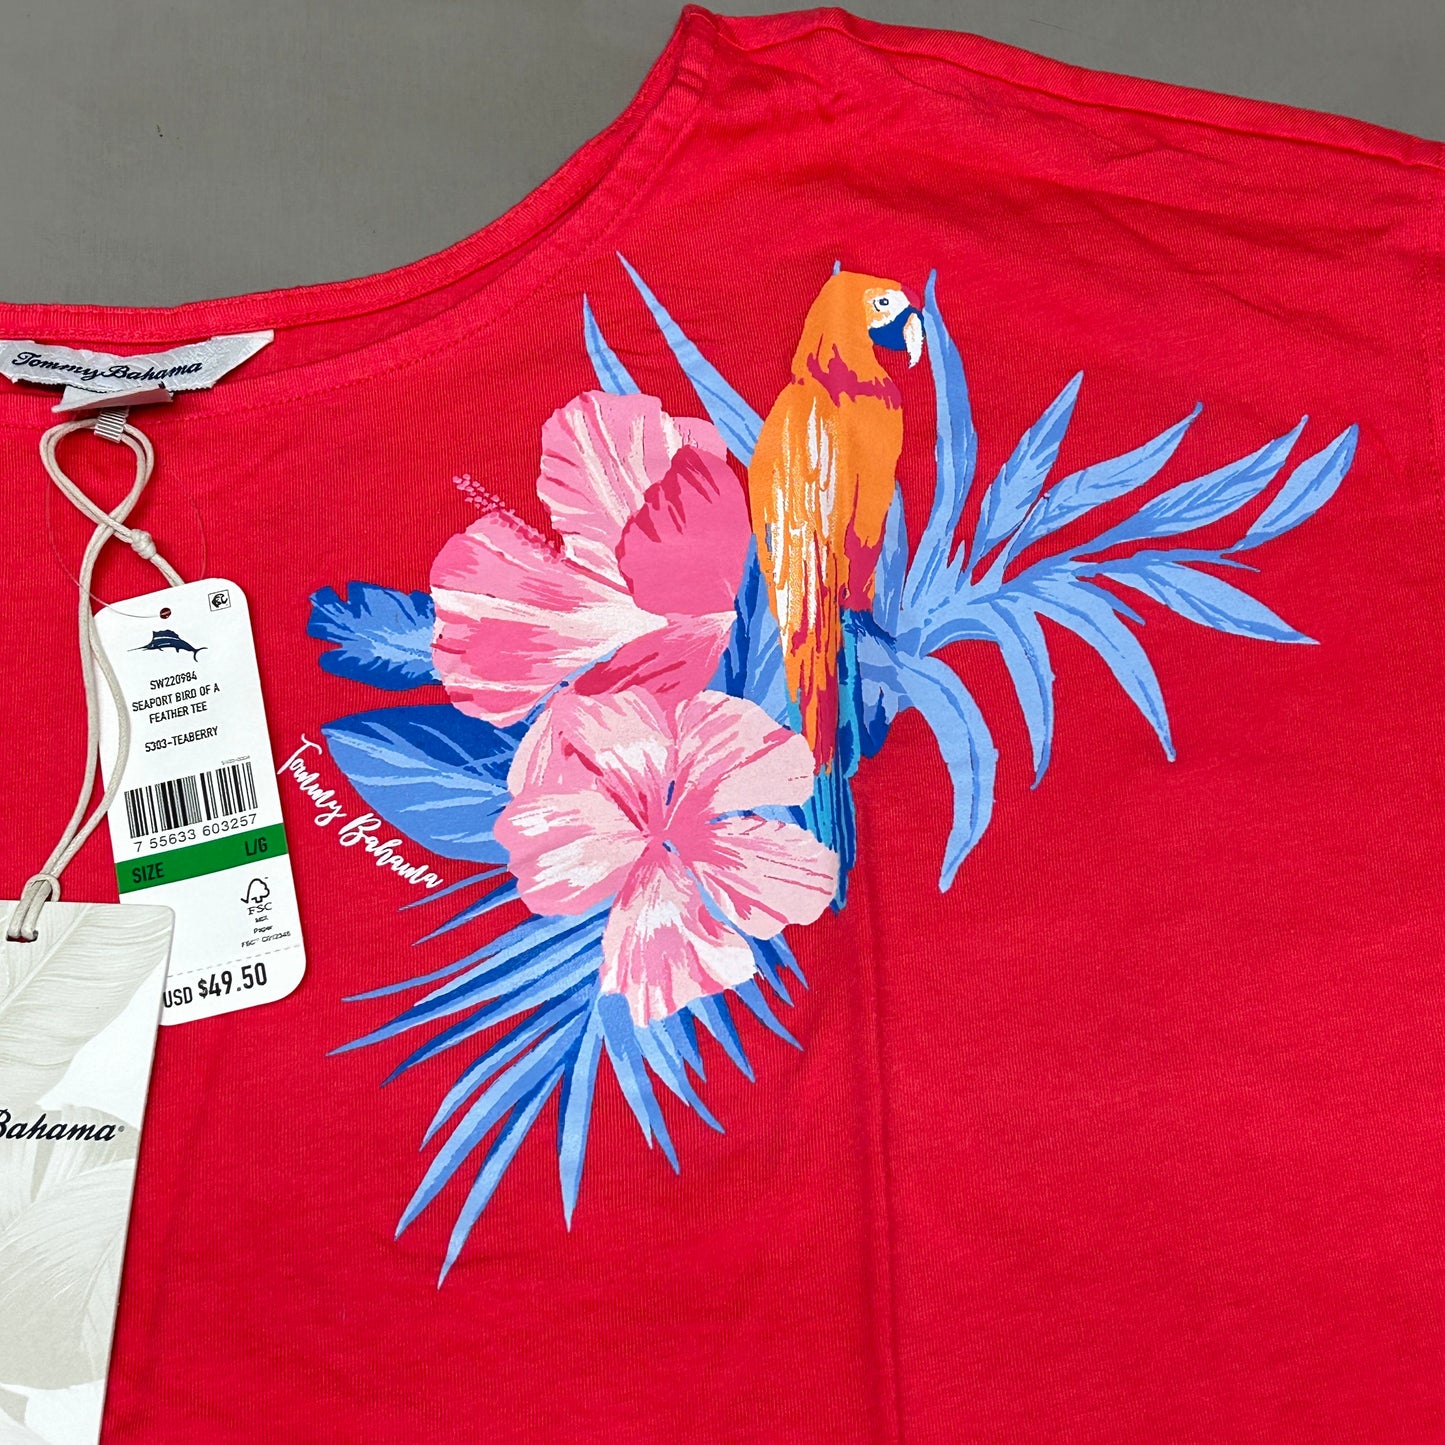 TOMMY BAHAMA Women's Seaport Bird of a Feather Tee Shirt TeaBerry Size L(New)